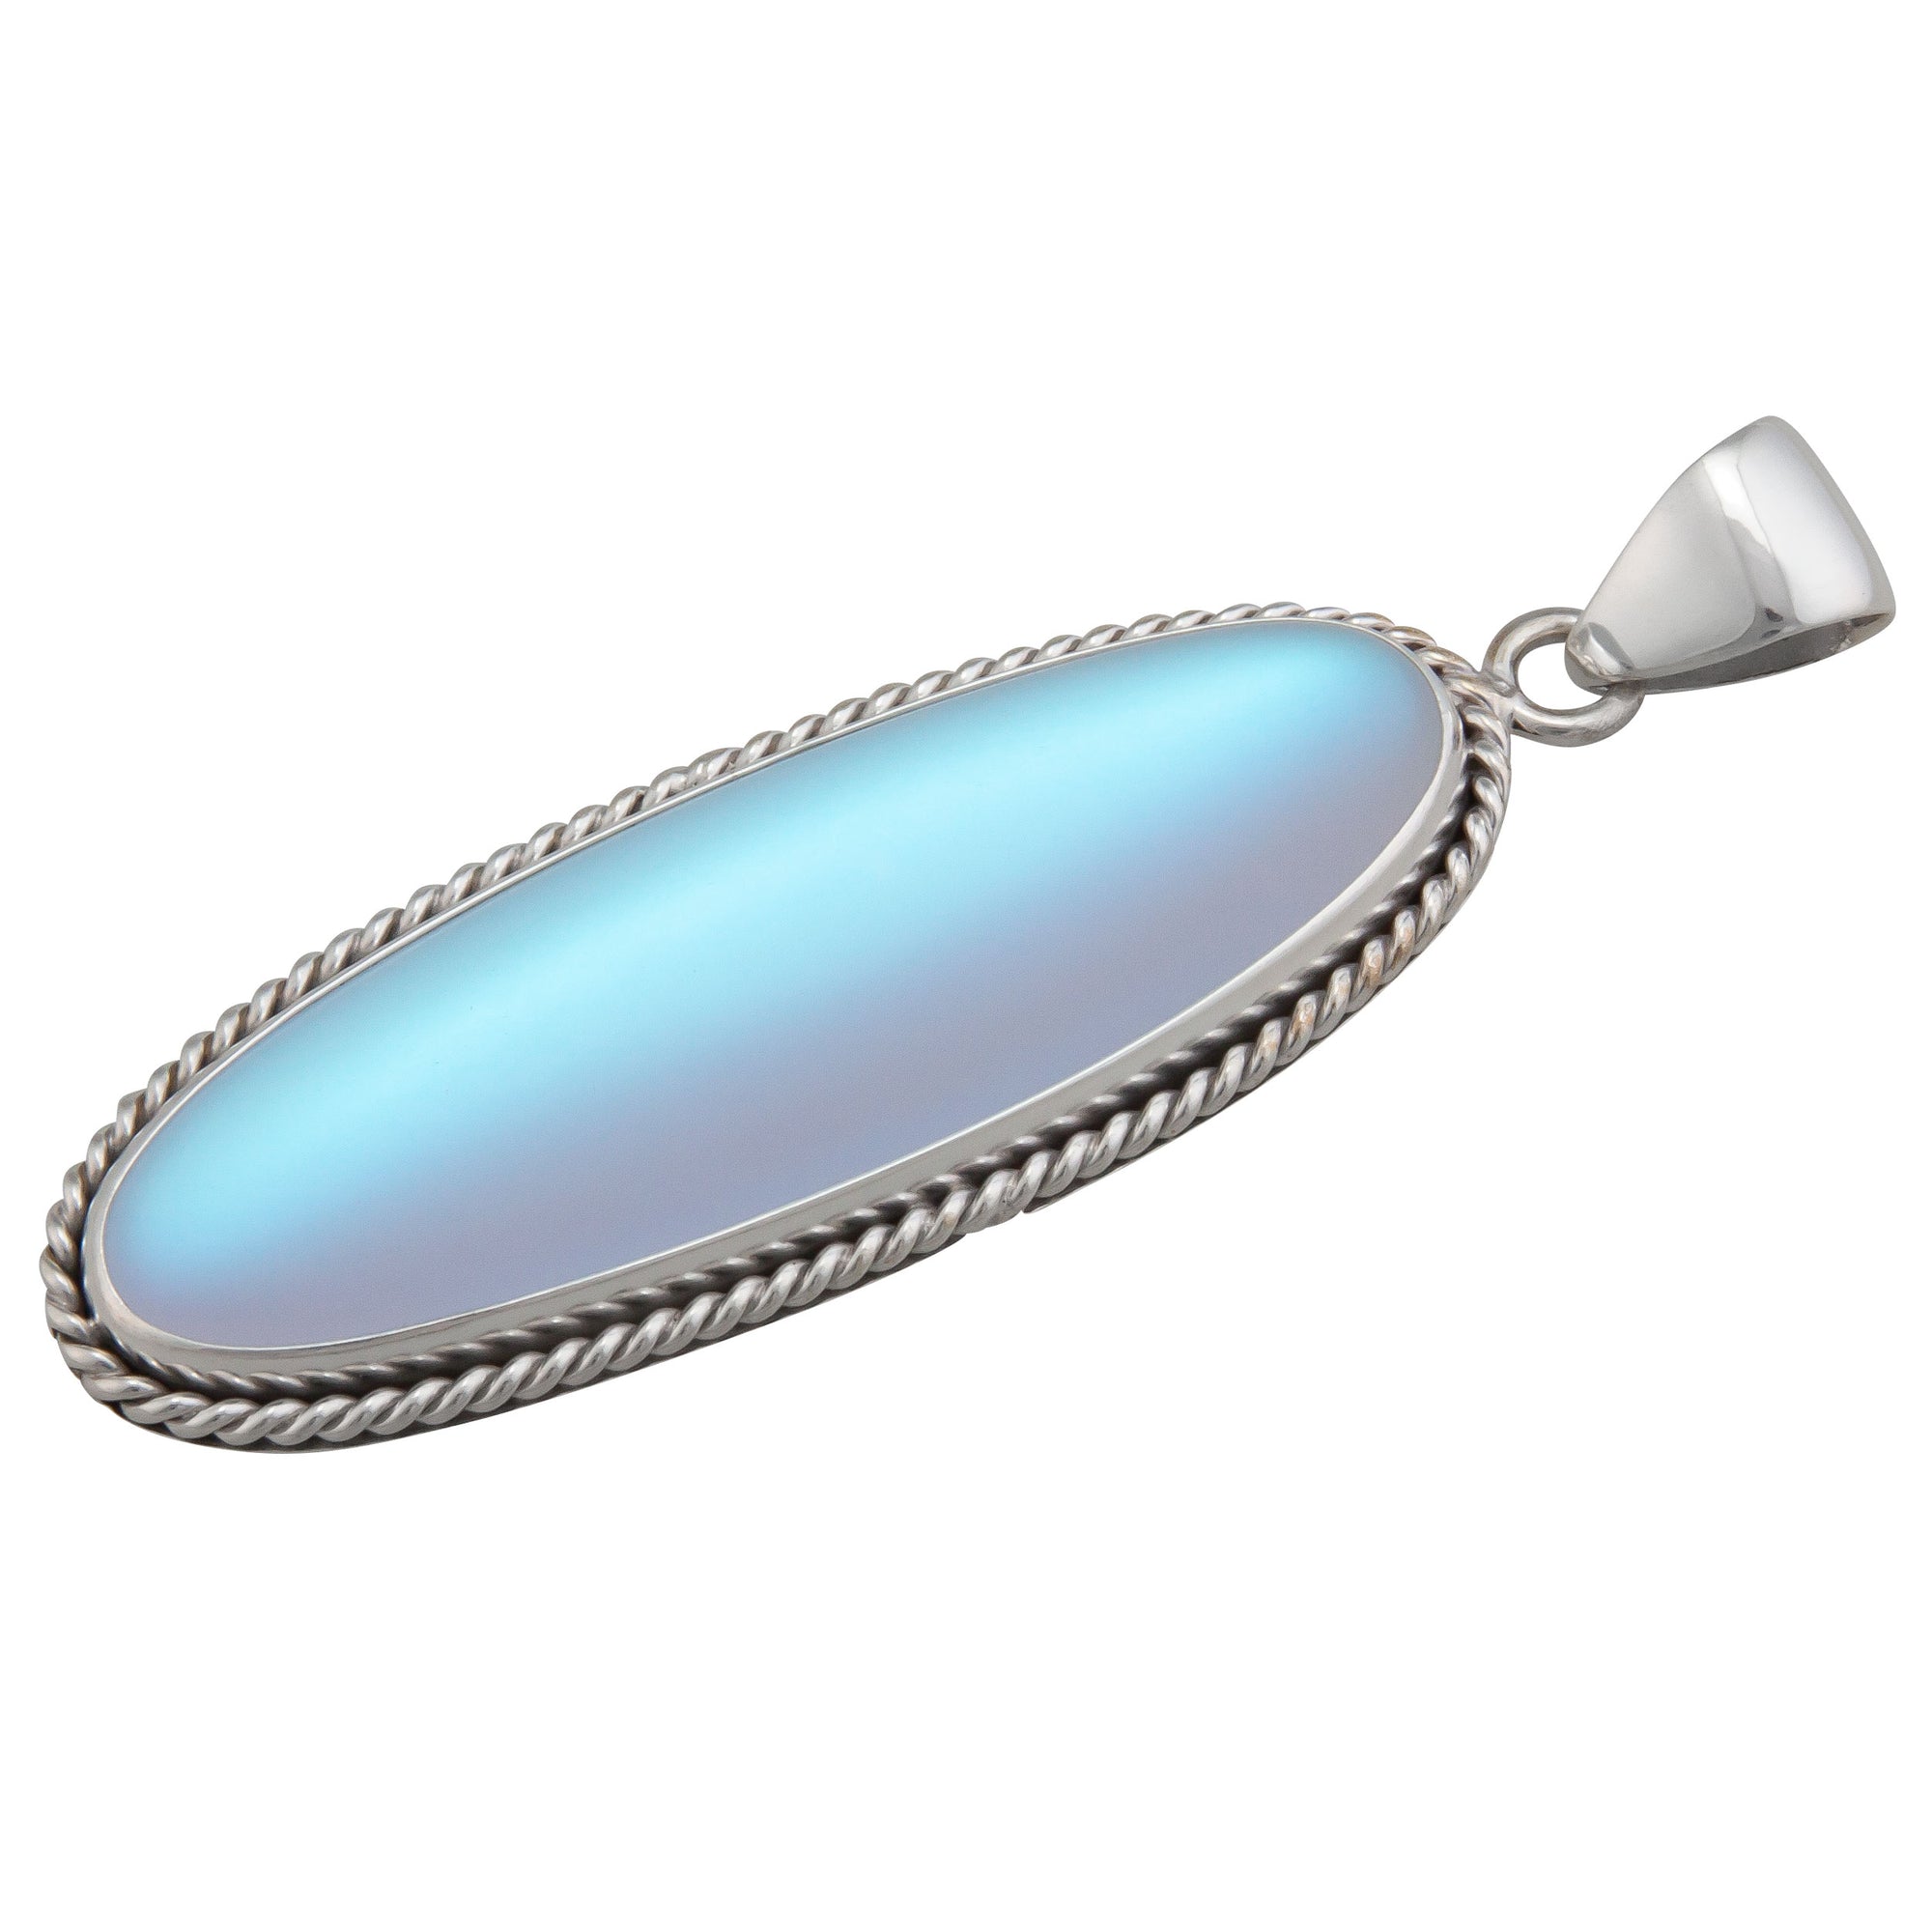 Charles Albert Jewelry - Sterling Silver Luminite Oblong Rope Pendant - Side View